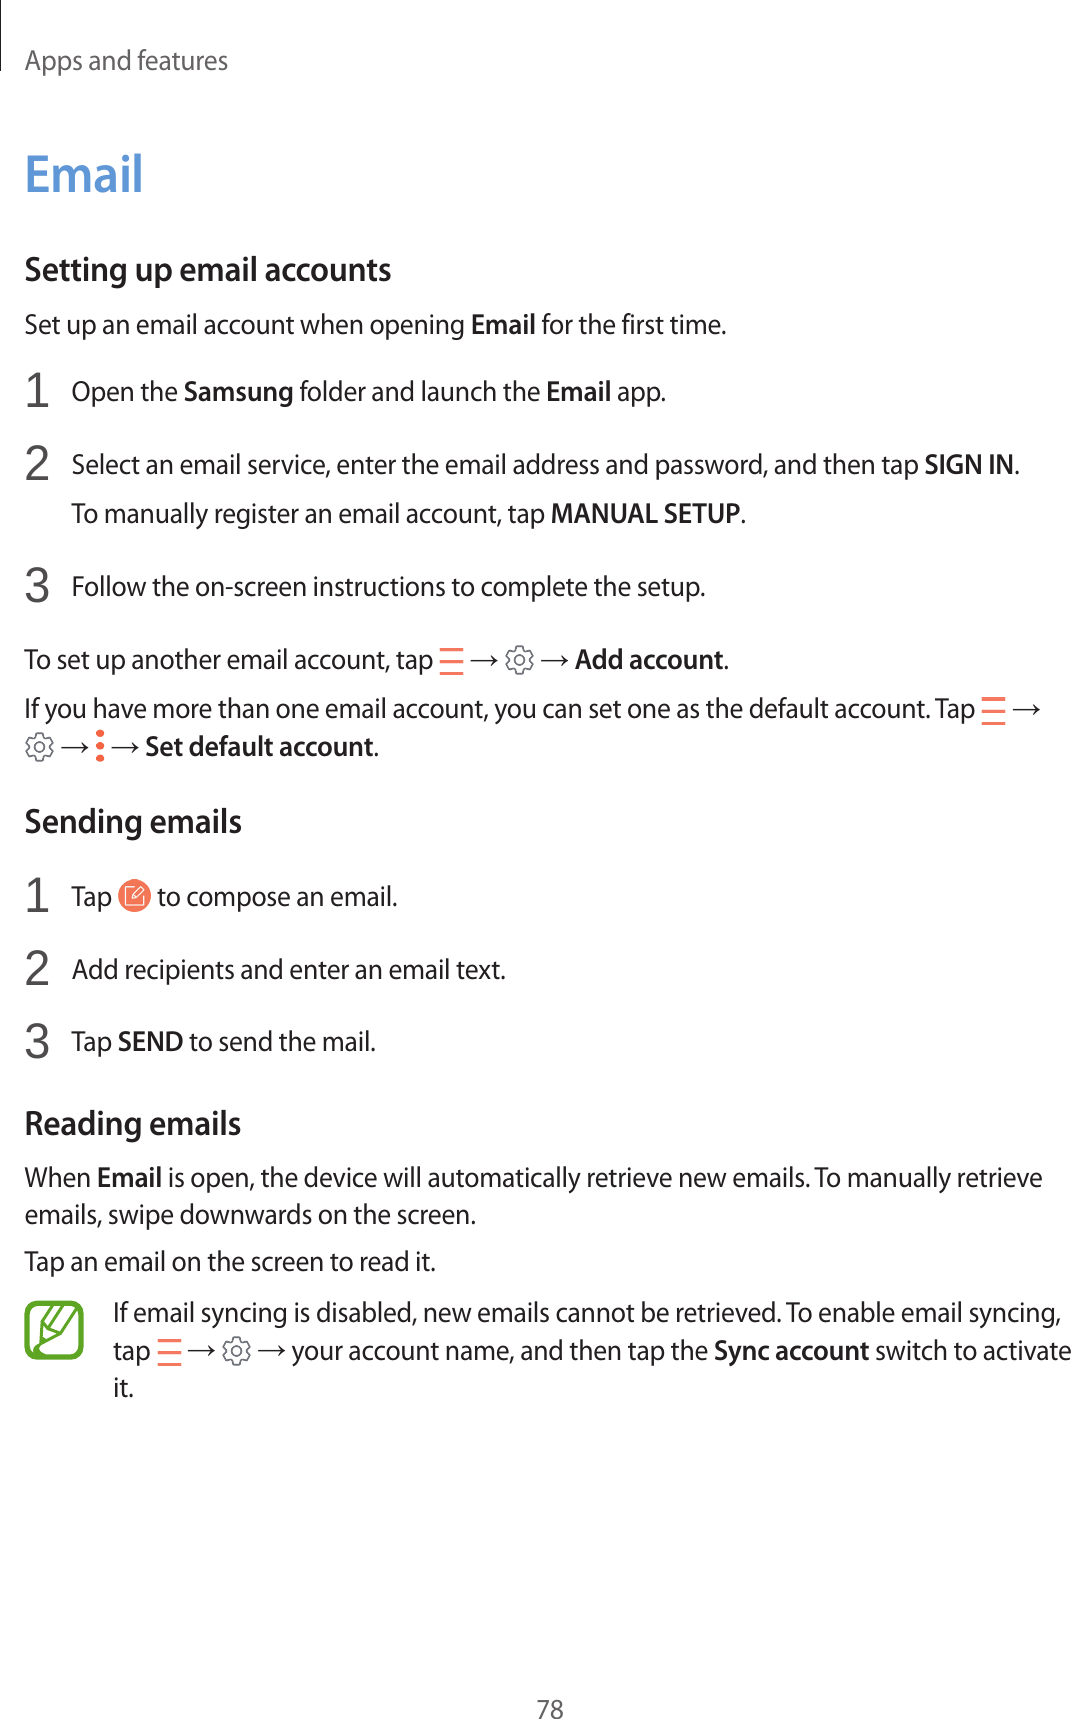 Apps and features78EmailSetting up email accountsSet up an email account when opening Email for the first time.1  Open the Samsung folder and launch the Email app.2  Select an email service, enter the email address and password, and then tap SIGN IN.To manually register an email account, tap MANUAL SETUP.3  Follow the on-screen instructions to complete the setup.To set up another email account, tap   →   → Add account.If you have more than one email account, you can set one as the default account. Tap   →  →   → Set default account.Sending emails1  Tap   to compose an email.2  Add recipients and enter an email text.3  Tap SEND to send the mail.Reading emailsWhen Email is open, the device will automatically retrieve new emails. To manually retrieve emails, swipe downwards on the screen.Tap an email on the screen to read it.If email syncing is disabled, new emails cannot be retrieved. To enable email syncing, tap   →   → your account name, and then tap the Sync account switch to activate it.